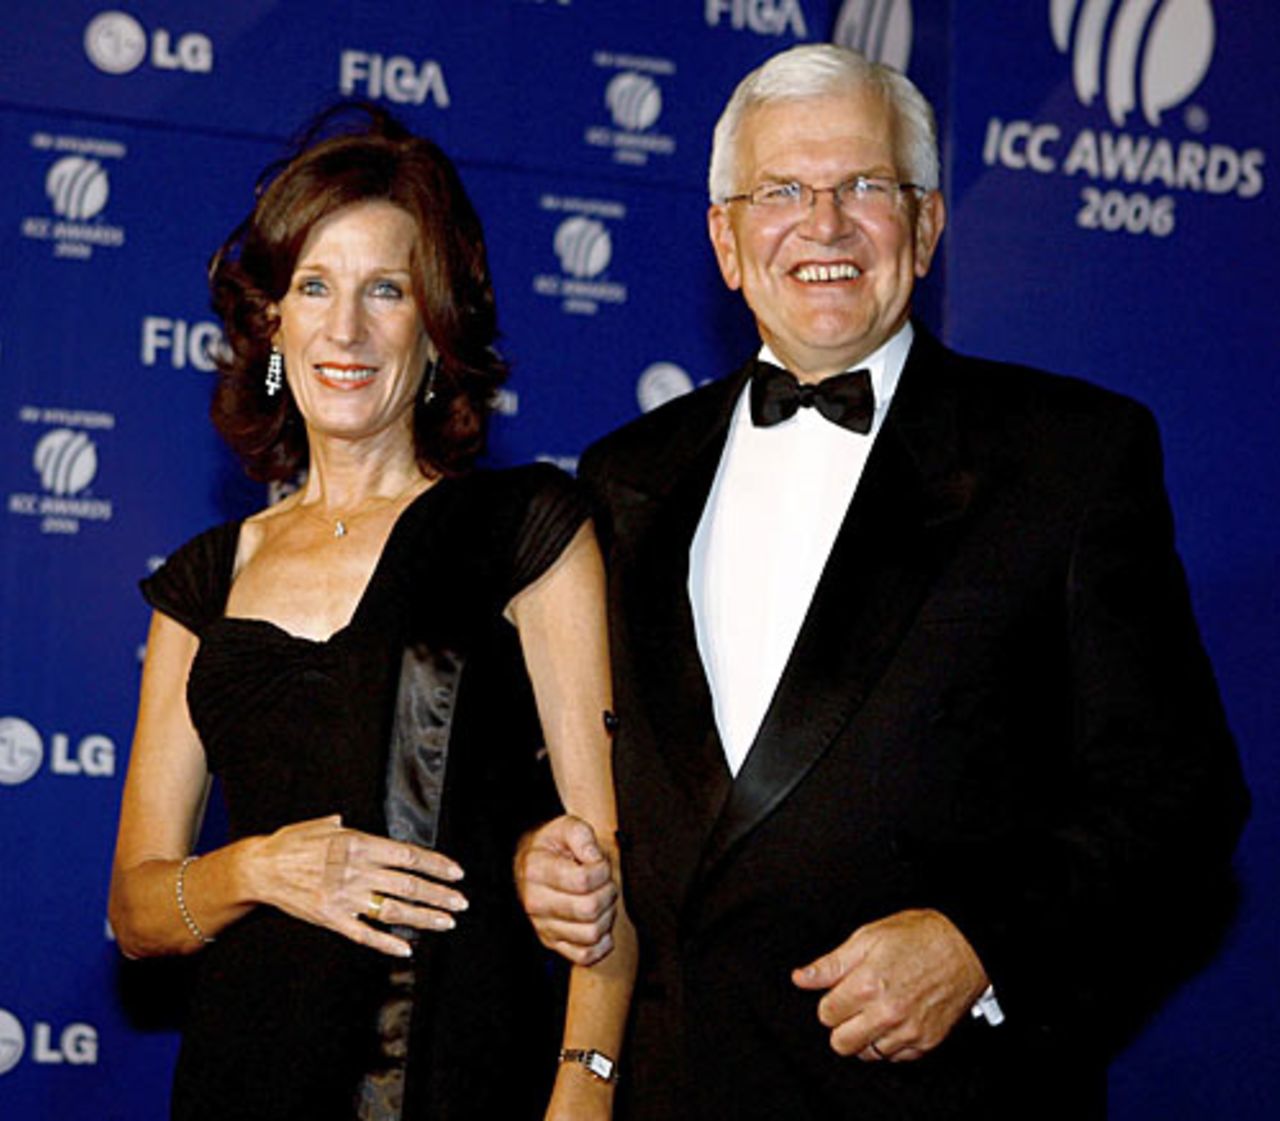 Malcolm and Alison Speed arrive at the ICC Awards, Mumbai, November 3, 2006